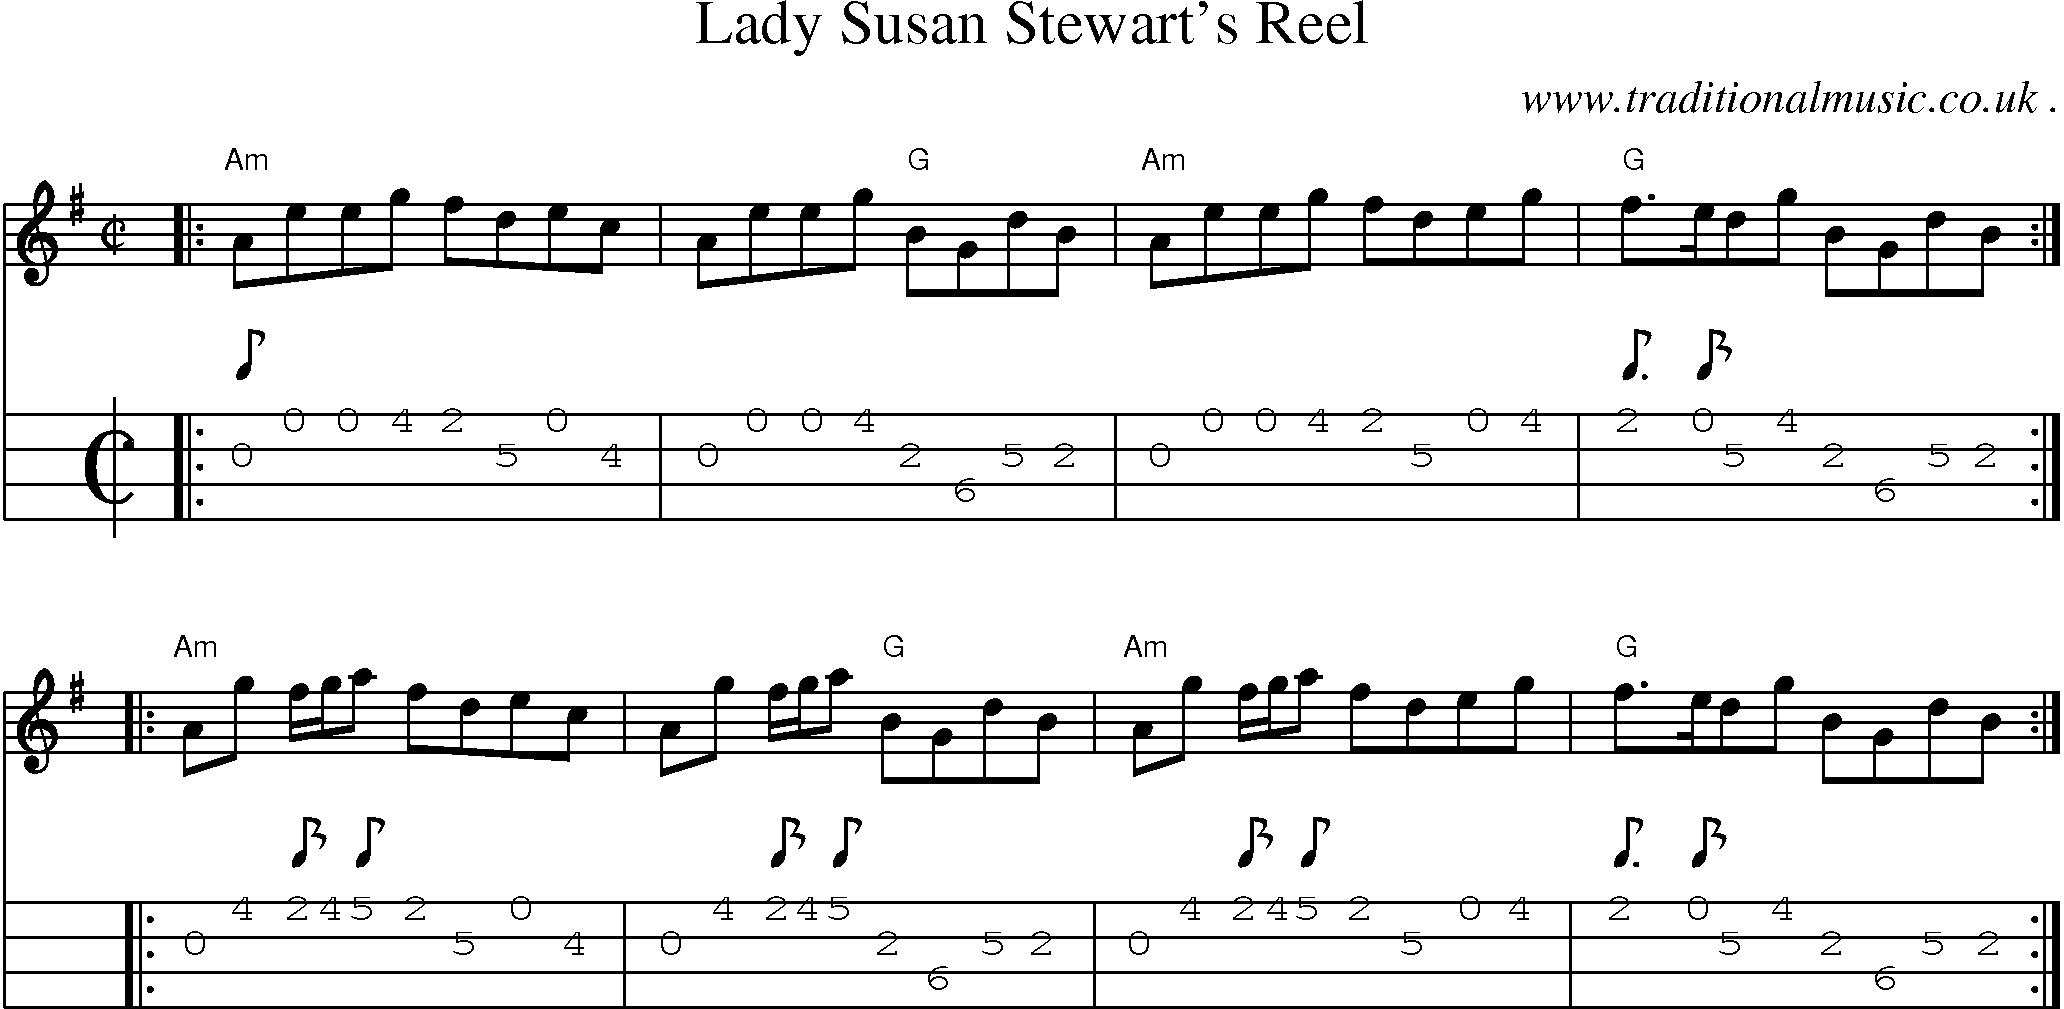 Sheet-music  score, Chords and Mandolin Tabs for Lady Susan Stewarts Reel